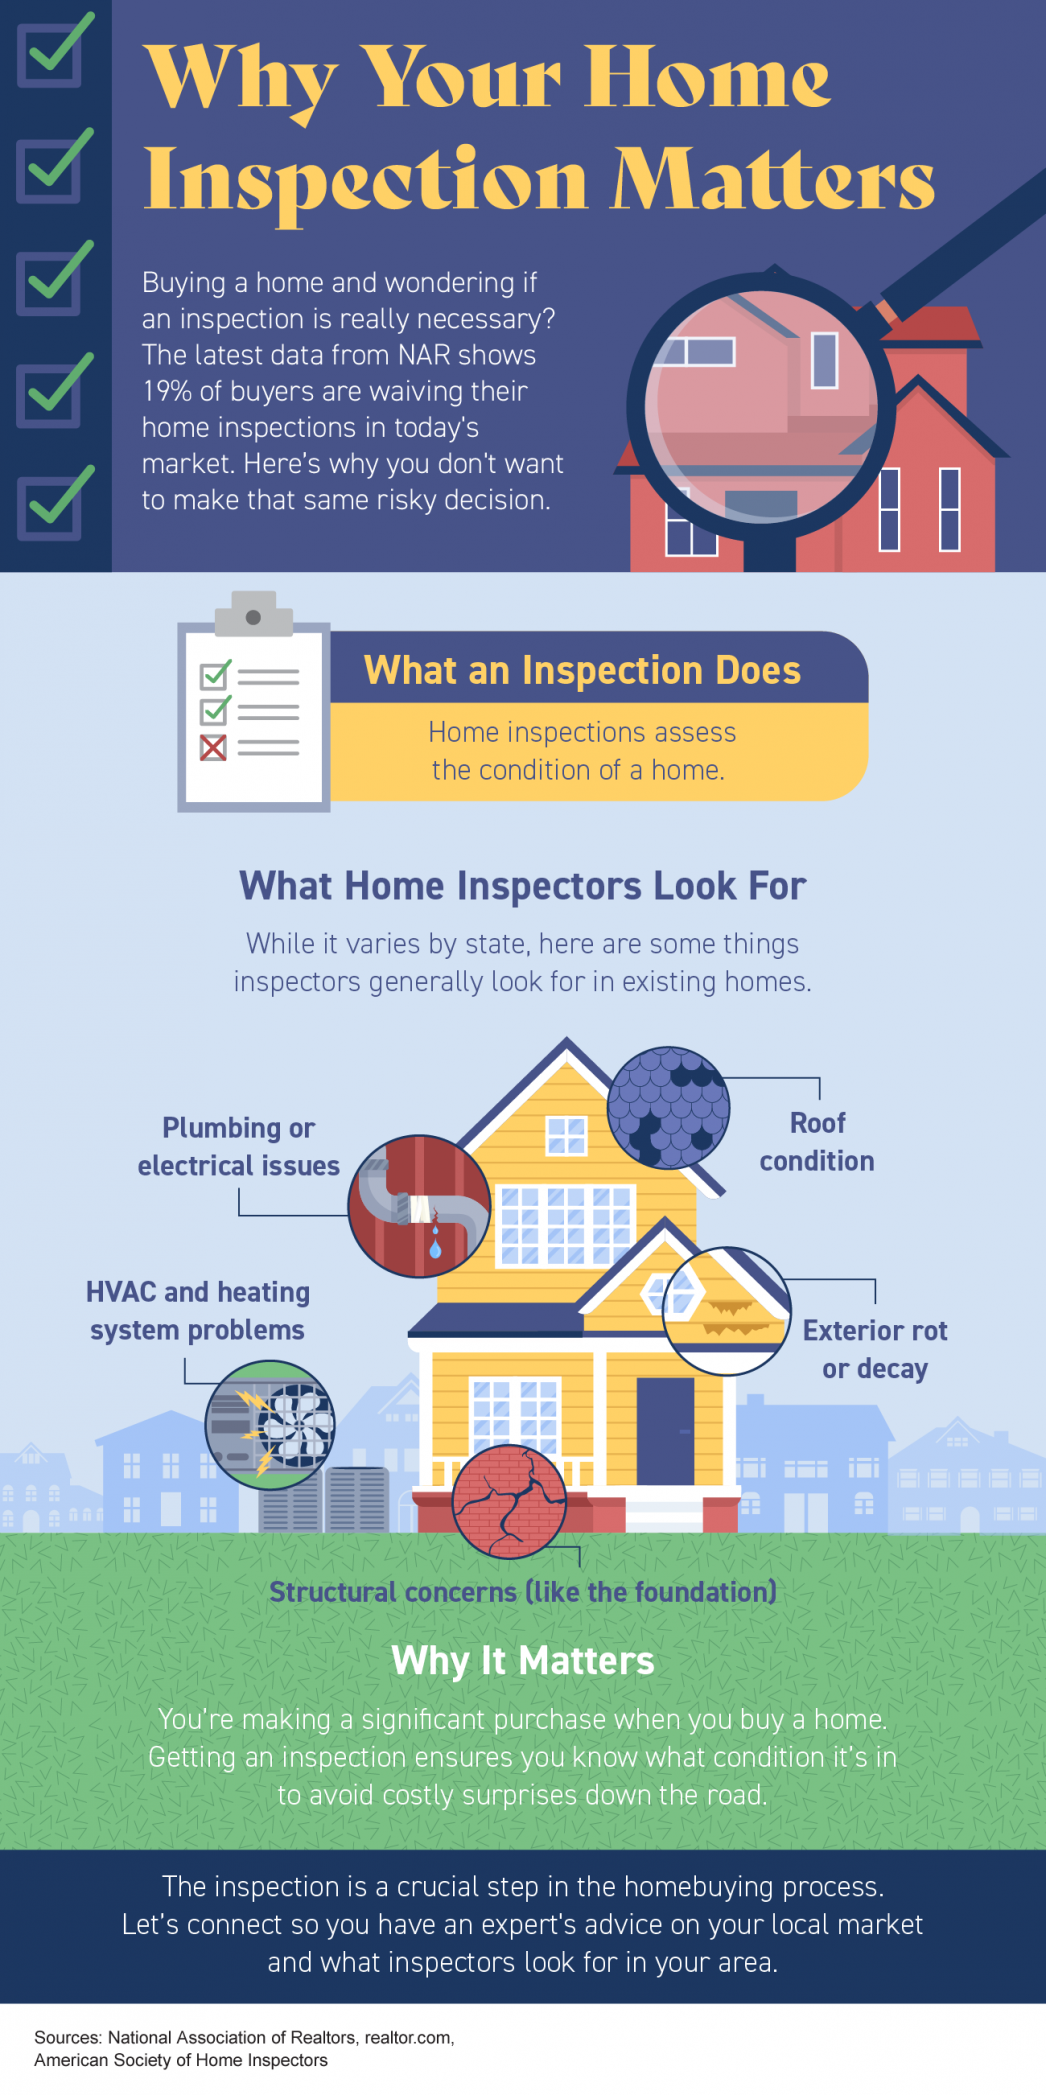 Why Your Home Inspection Matters - KM Realty Group LLC, Chicago